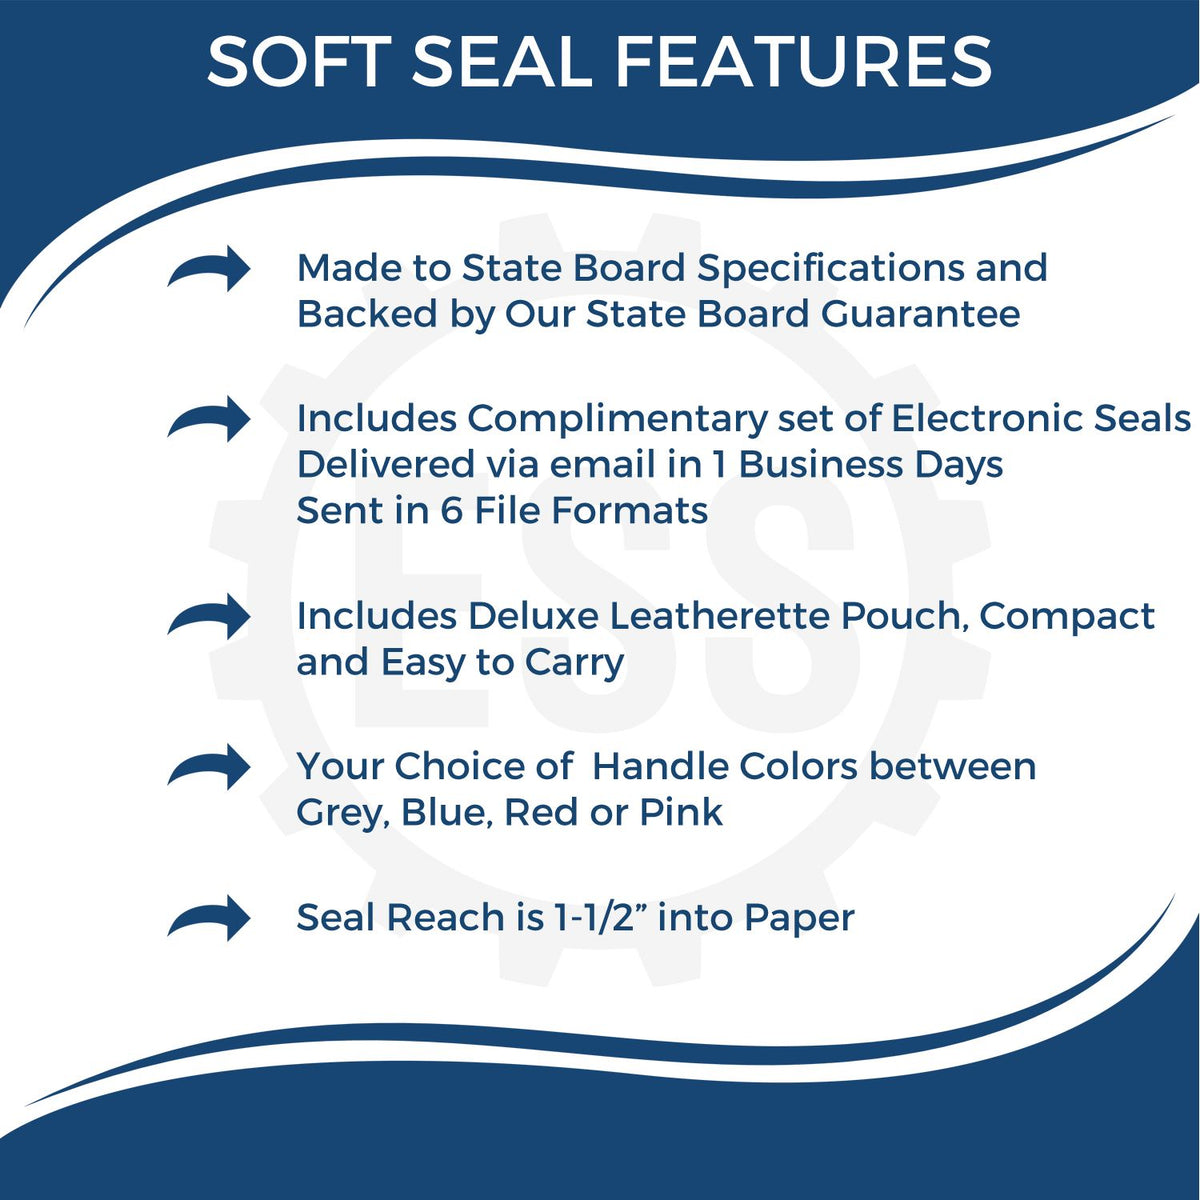 A picture of an infographic highlighting the selling points for the Soft Washington Professional Engineer Seal